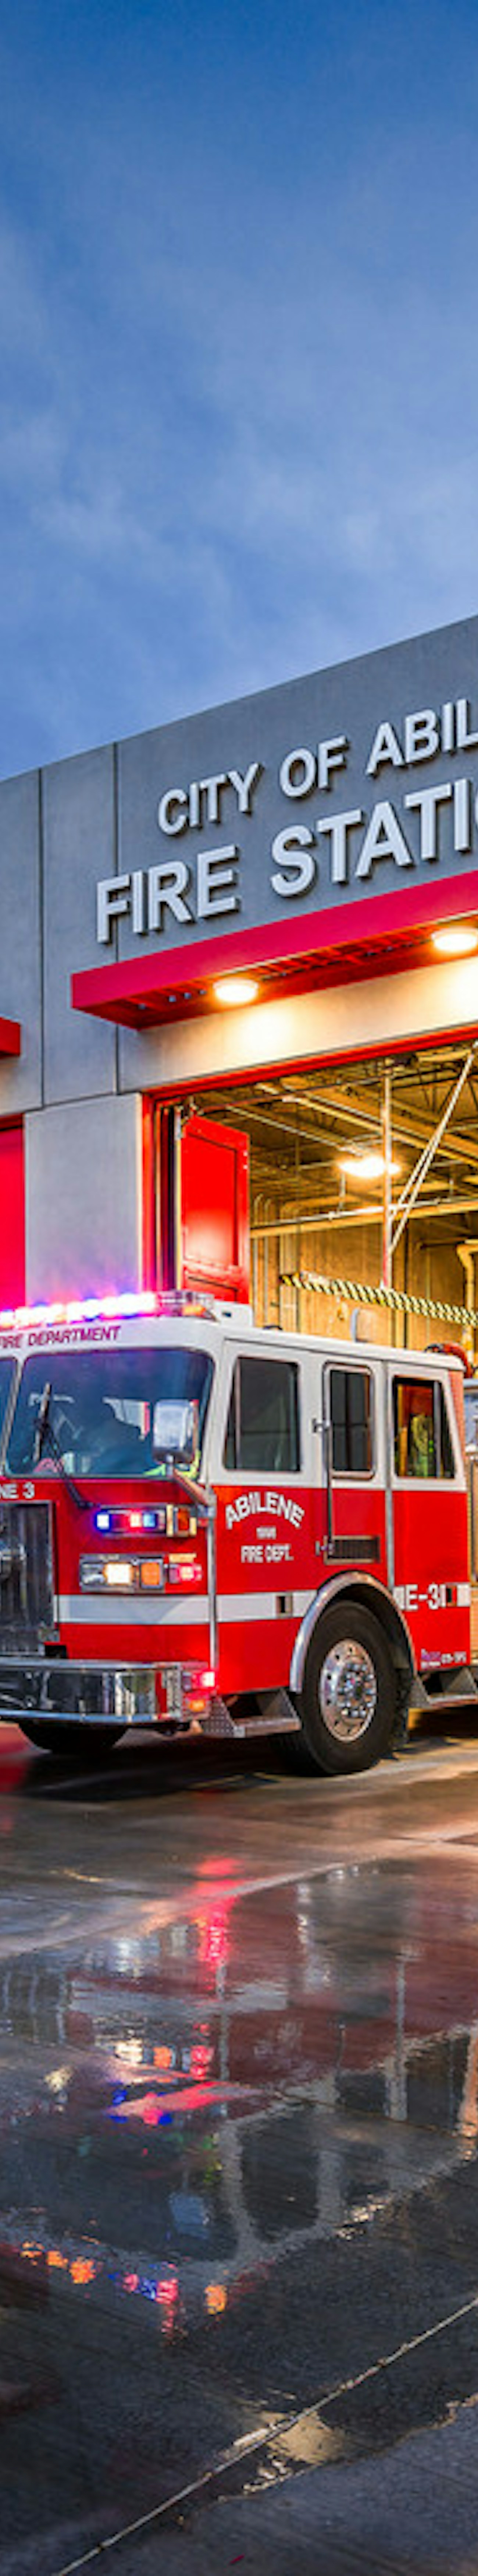                         City Of Abilene Fire Stations Three Four And Seven
                    